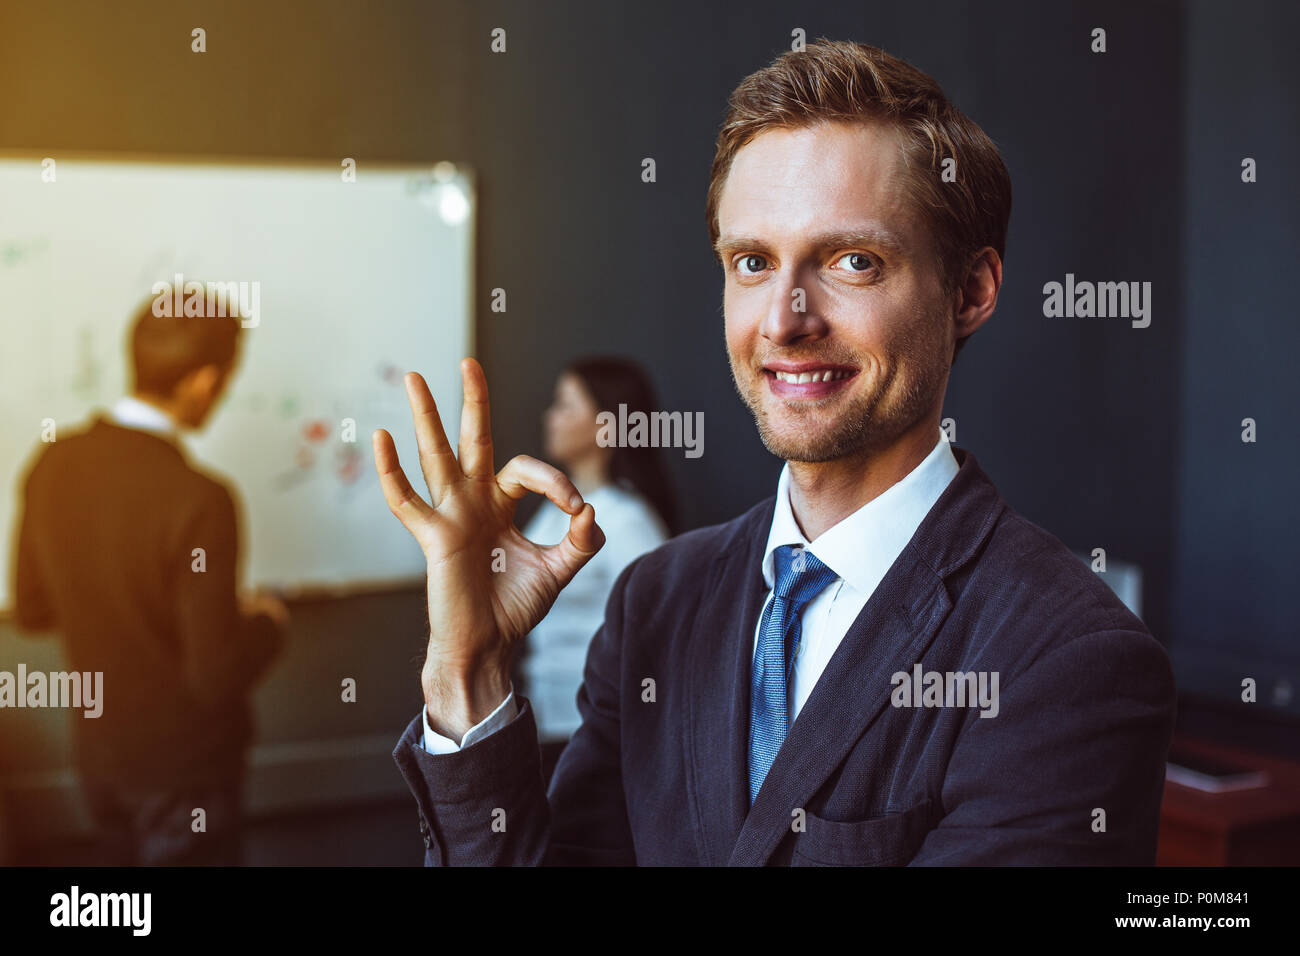 Smartly dressed businessman in office Banque D'Images